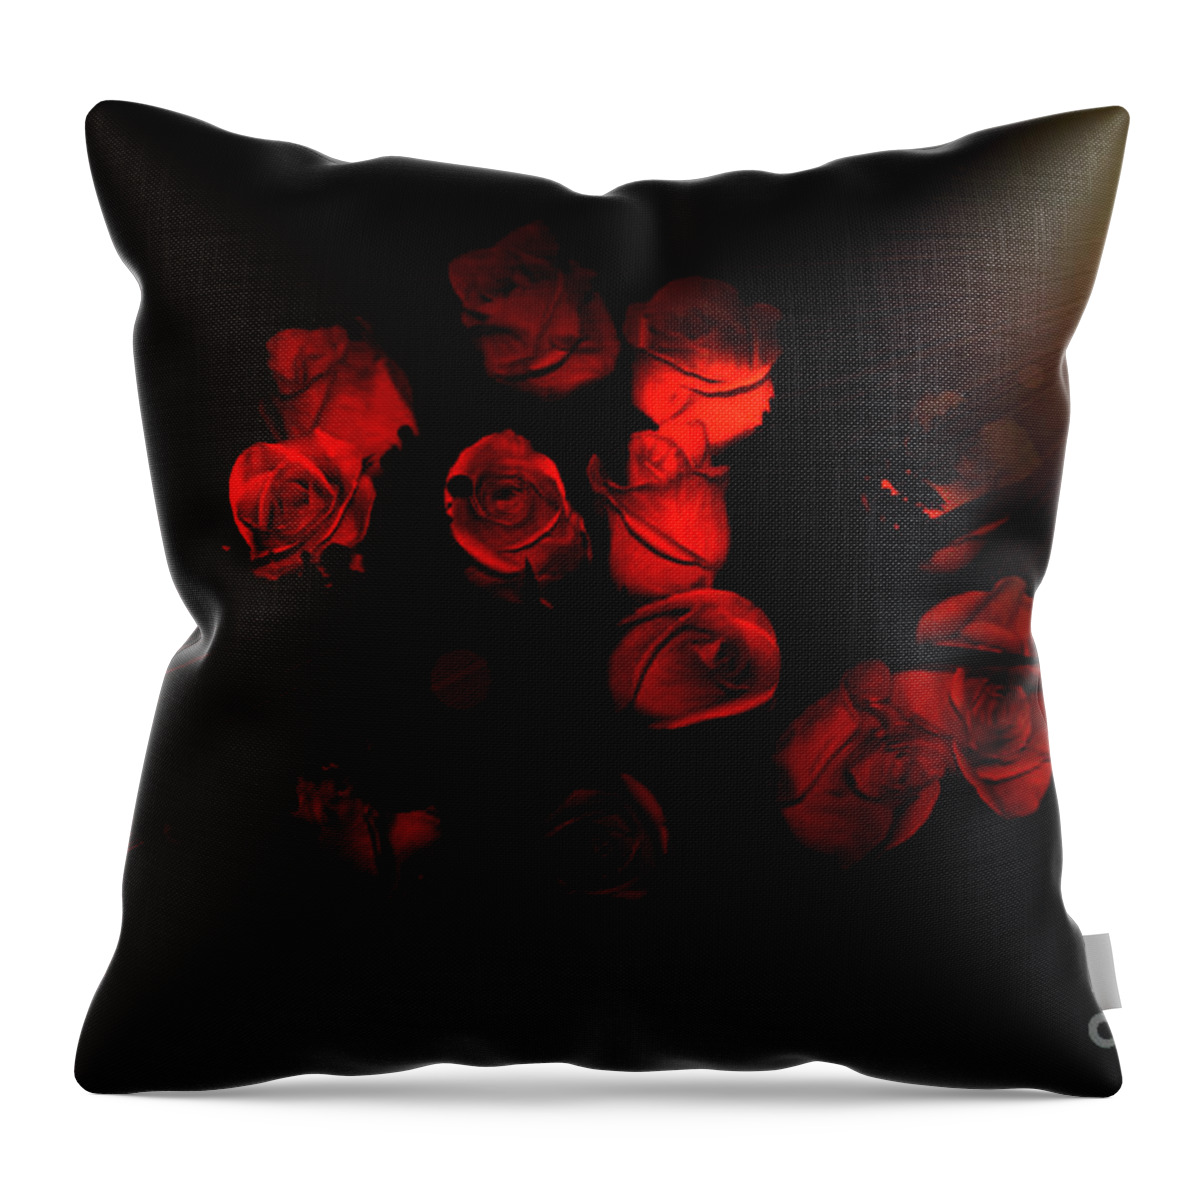 Roses Throw Pillow featuring the photograph Roses and Black by Oksana Semenchenko